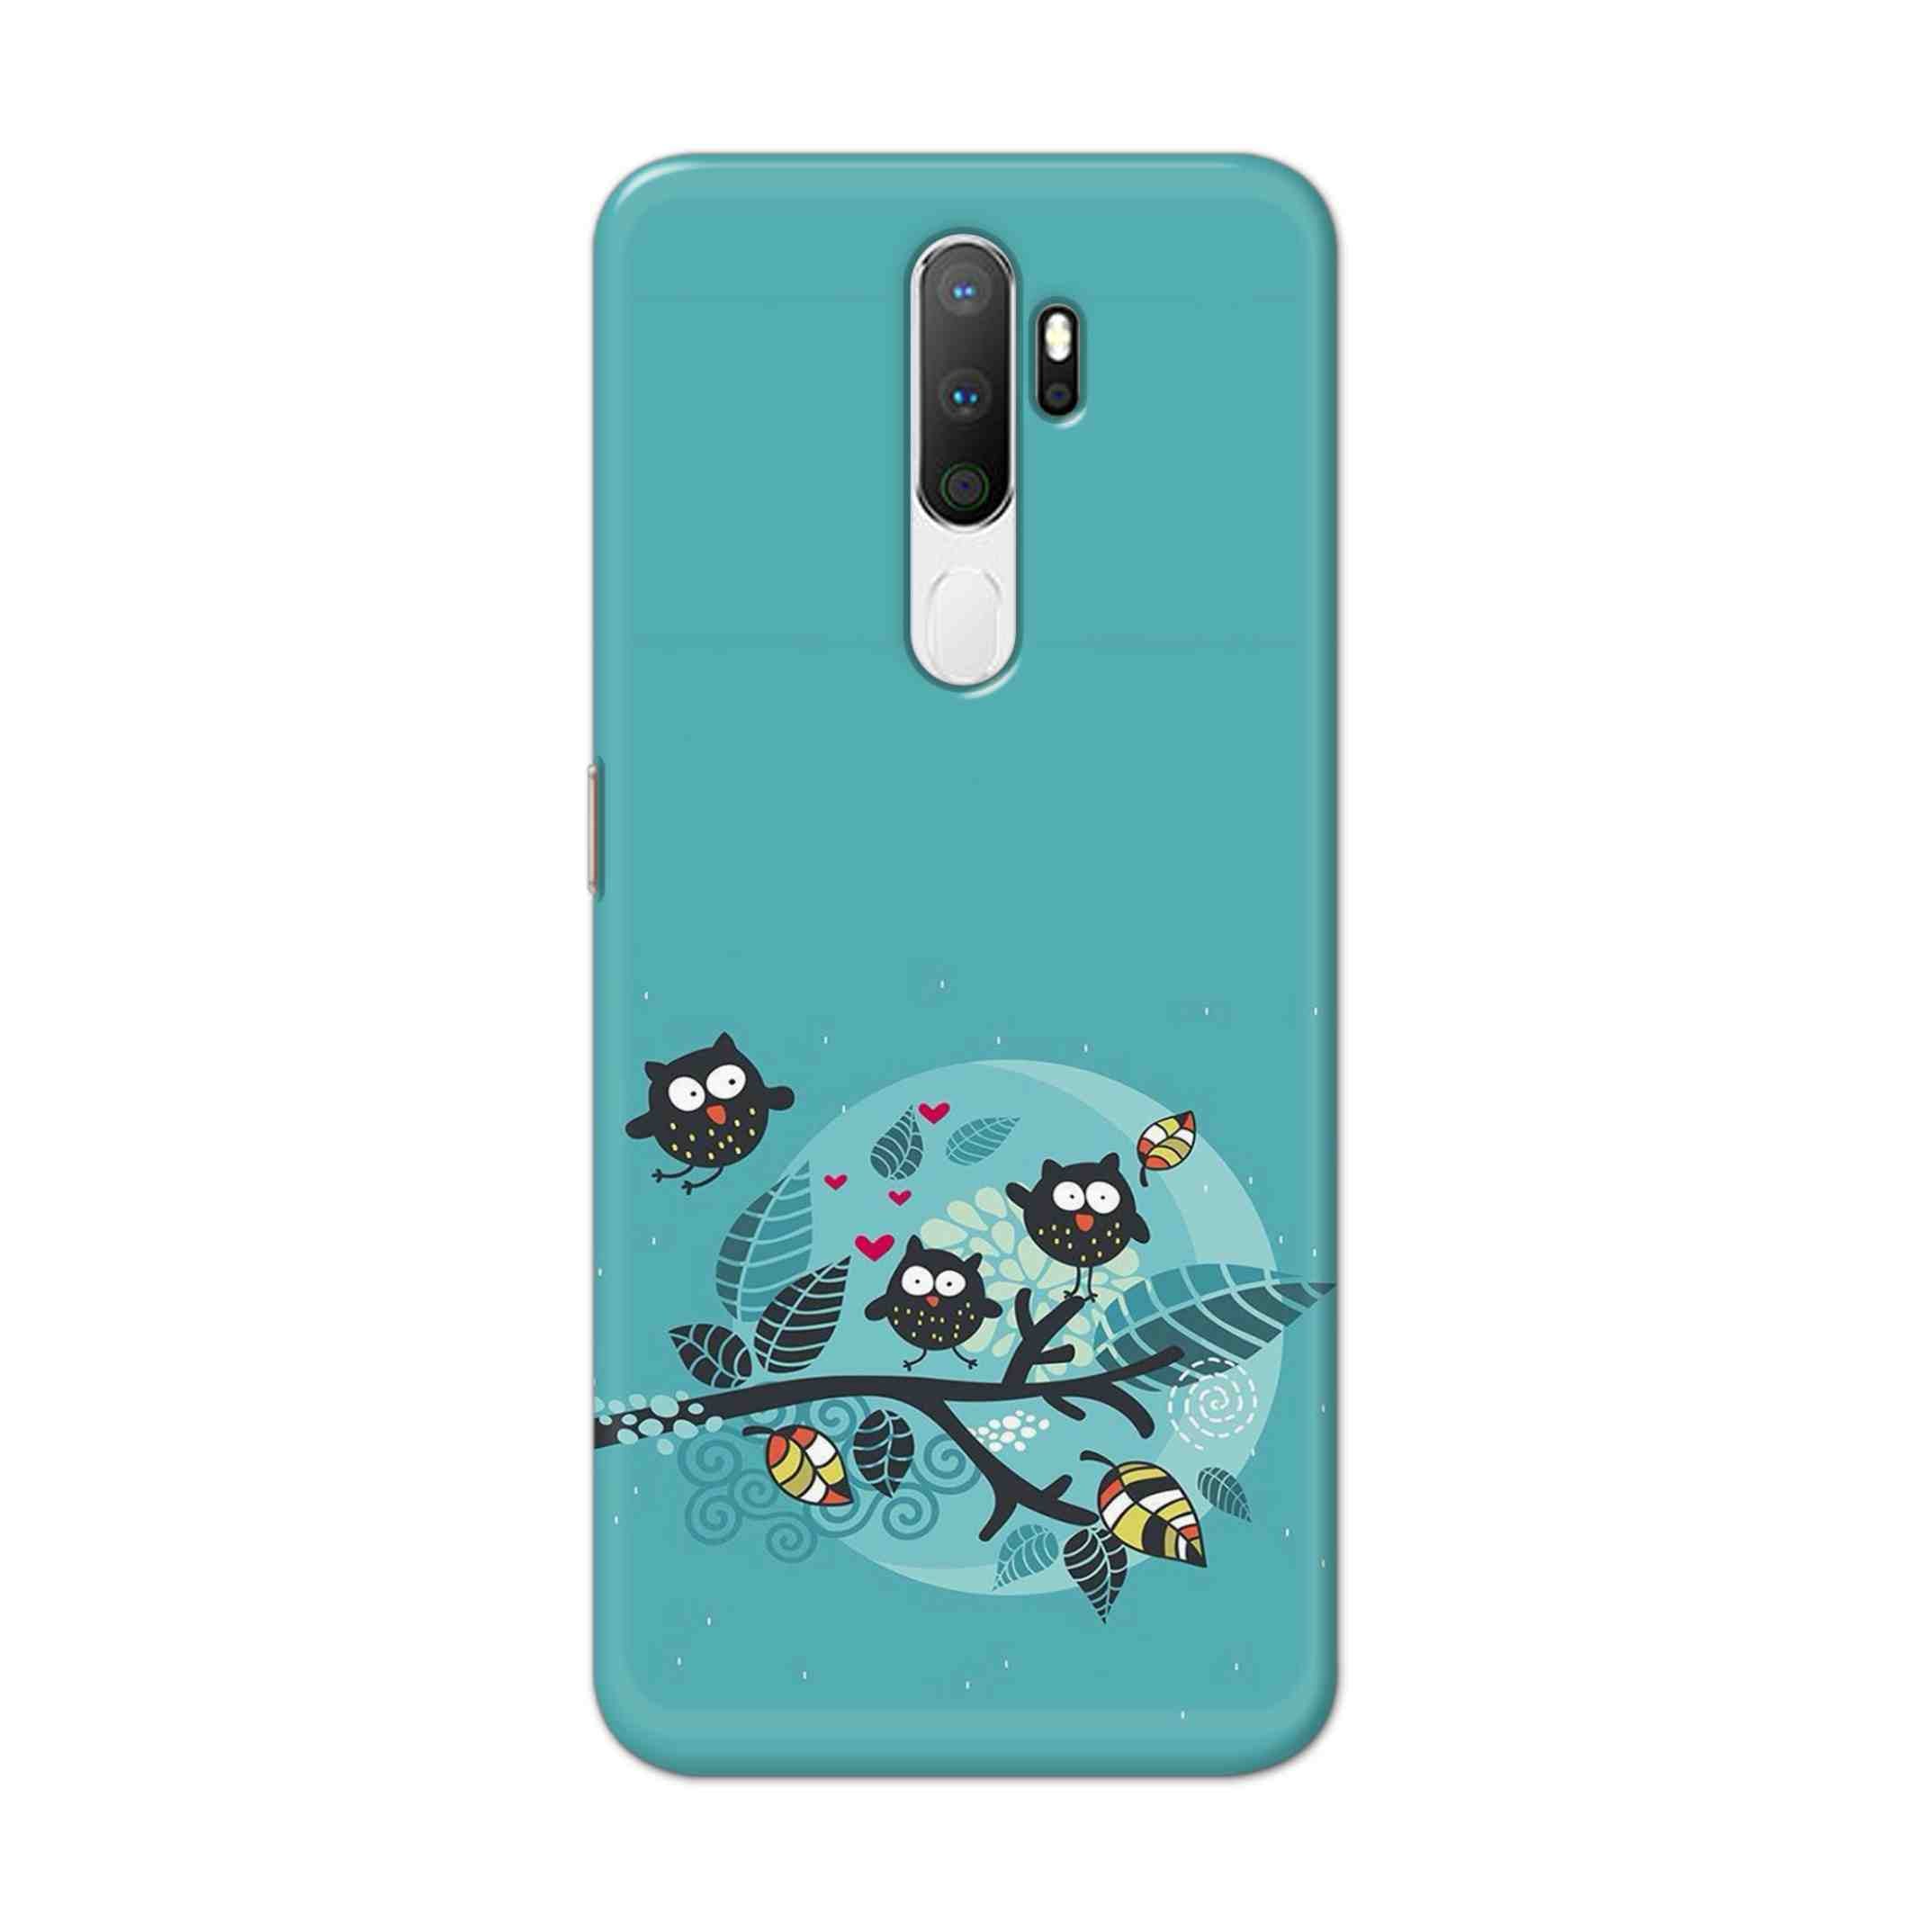 Buy Owl Hard Back Mobile Phone Case Cover For Oppo A5 (2020) Online